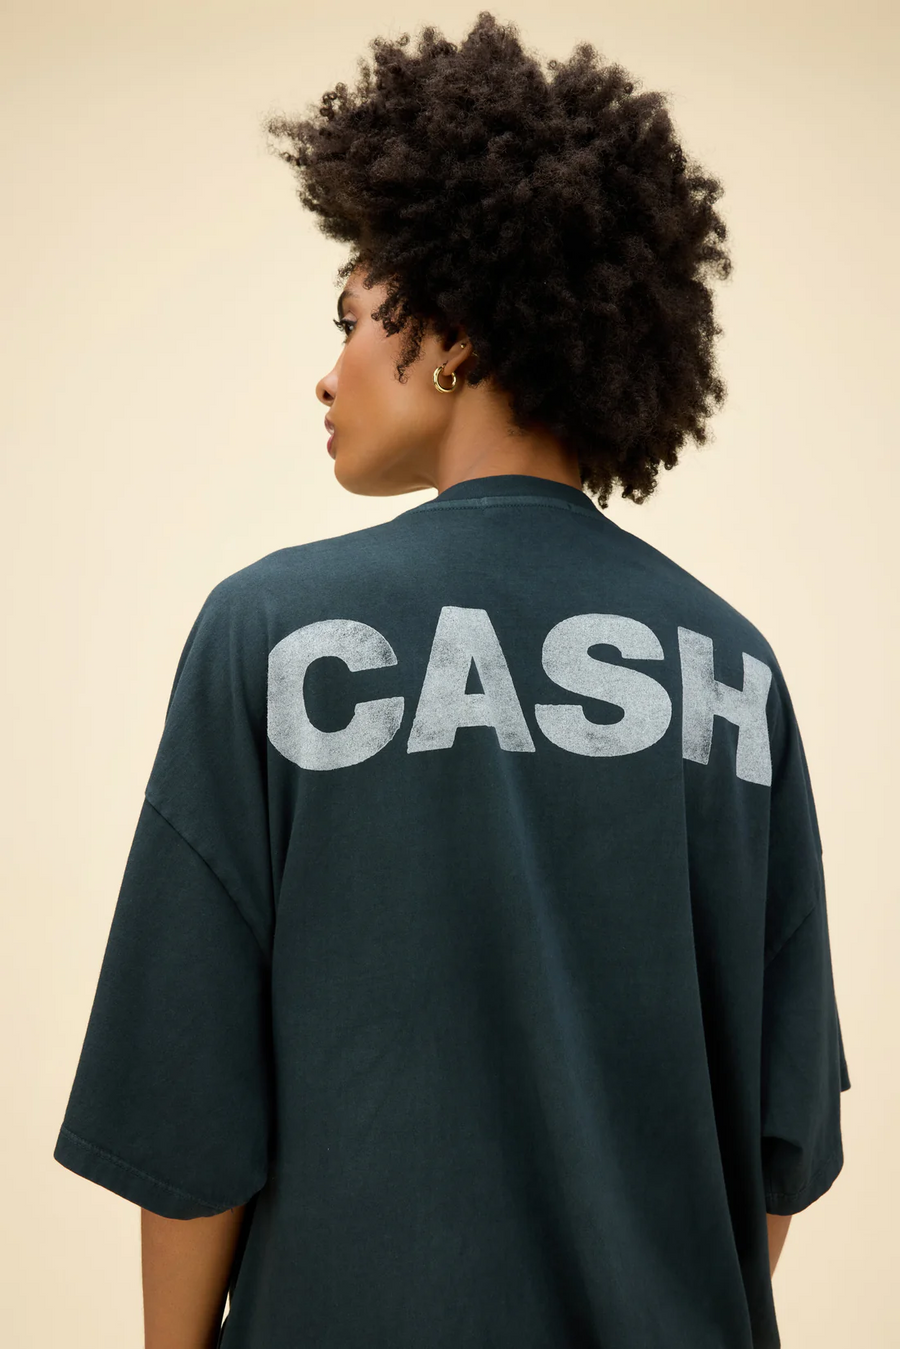 Johnny Cash Silhouette OS Tee by Daydreamer LA